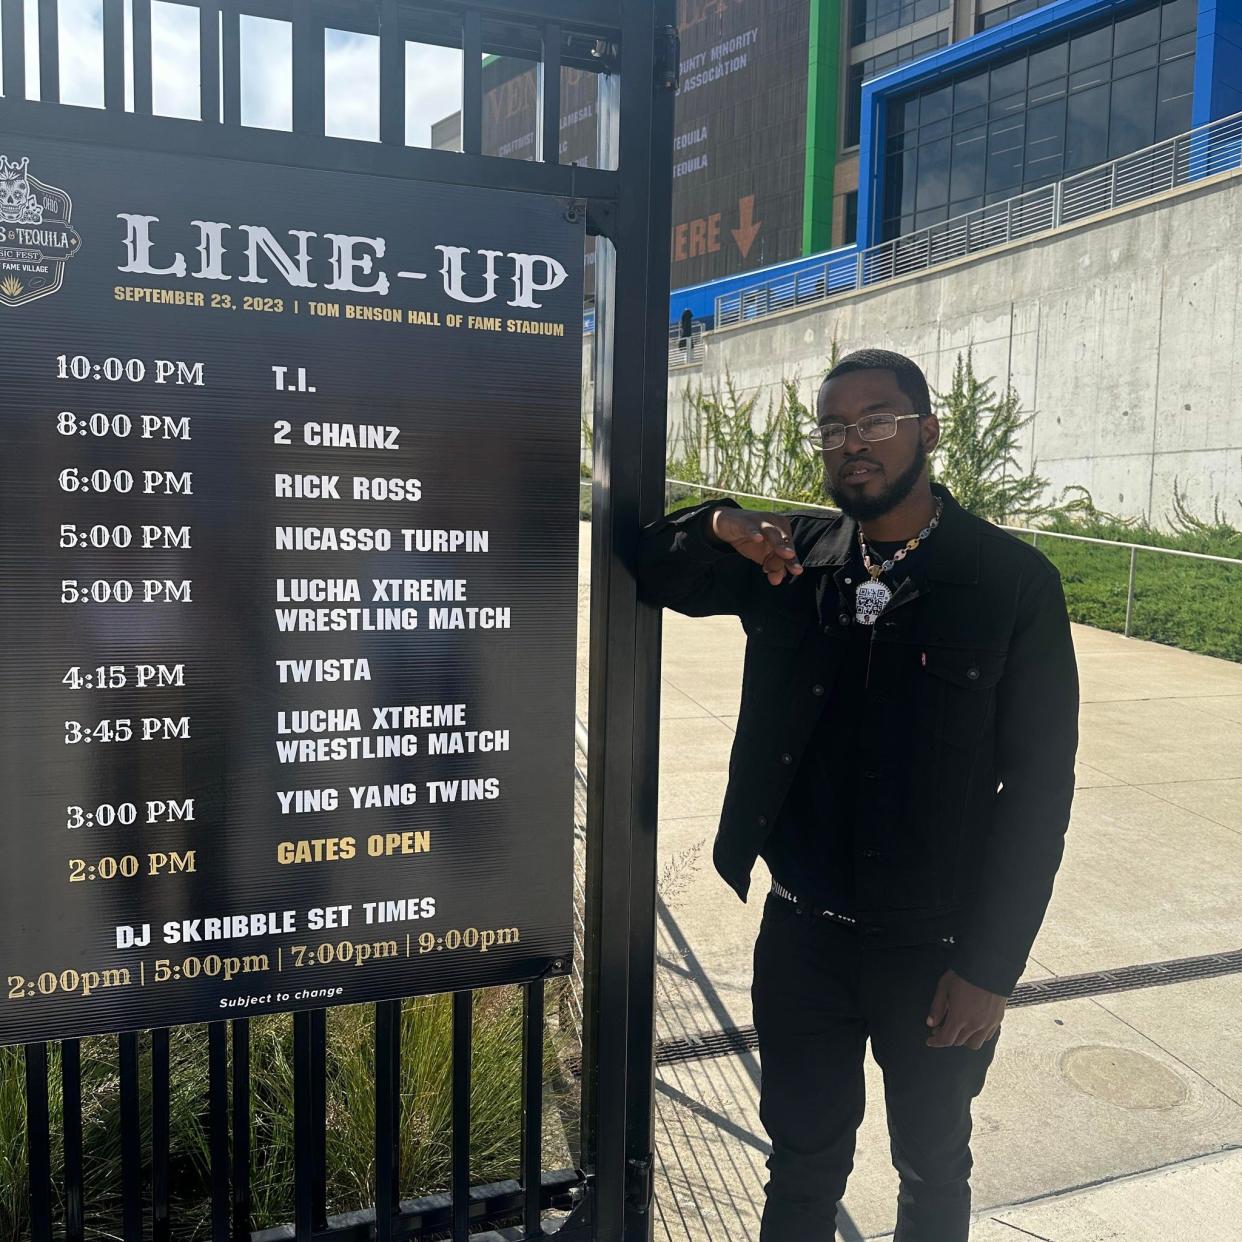 Canton-based hip-hop artist and rapper Nicasso Turpin is shown at the Hall of Fame Village in September prior to his performance at the Tacos & Tequila Music Fest at Tom Benson Hall of Fame Stadium.